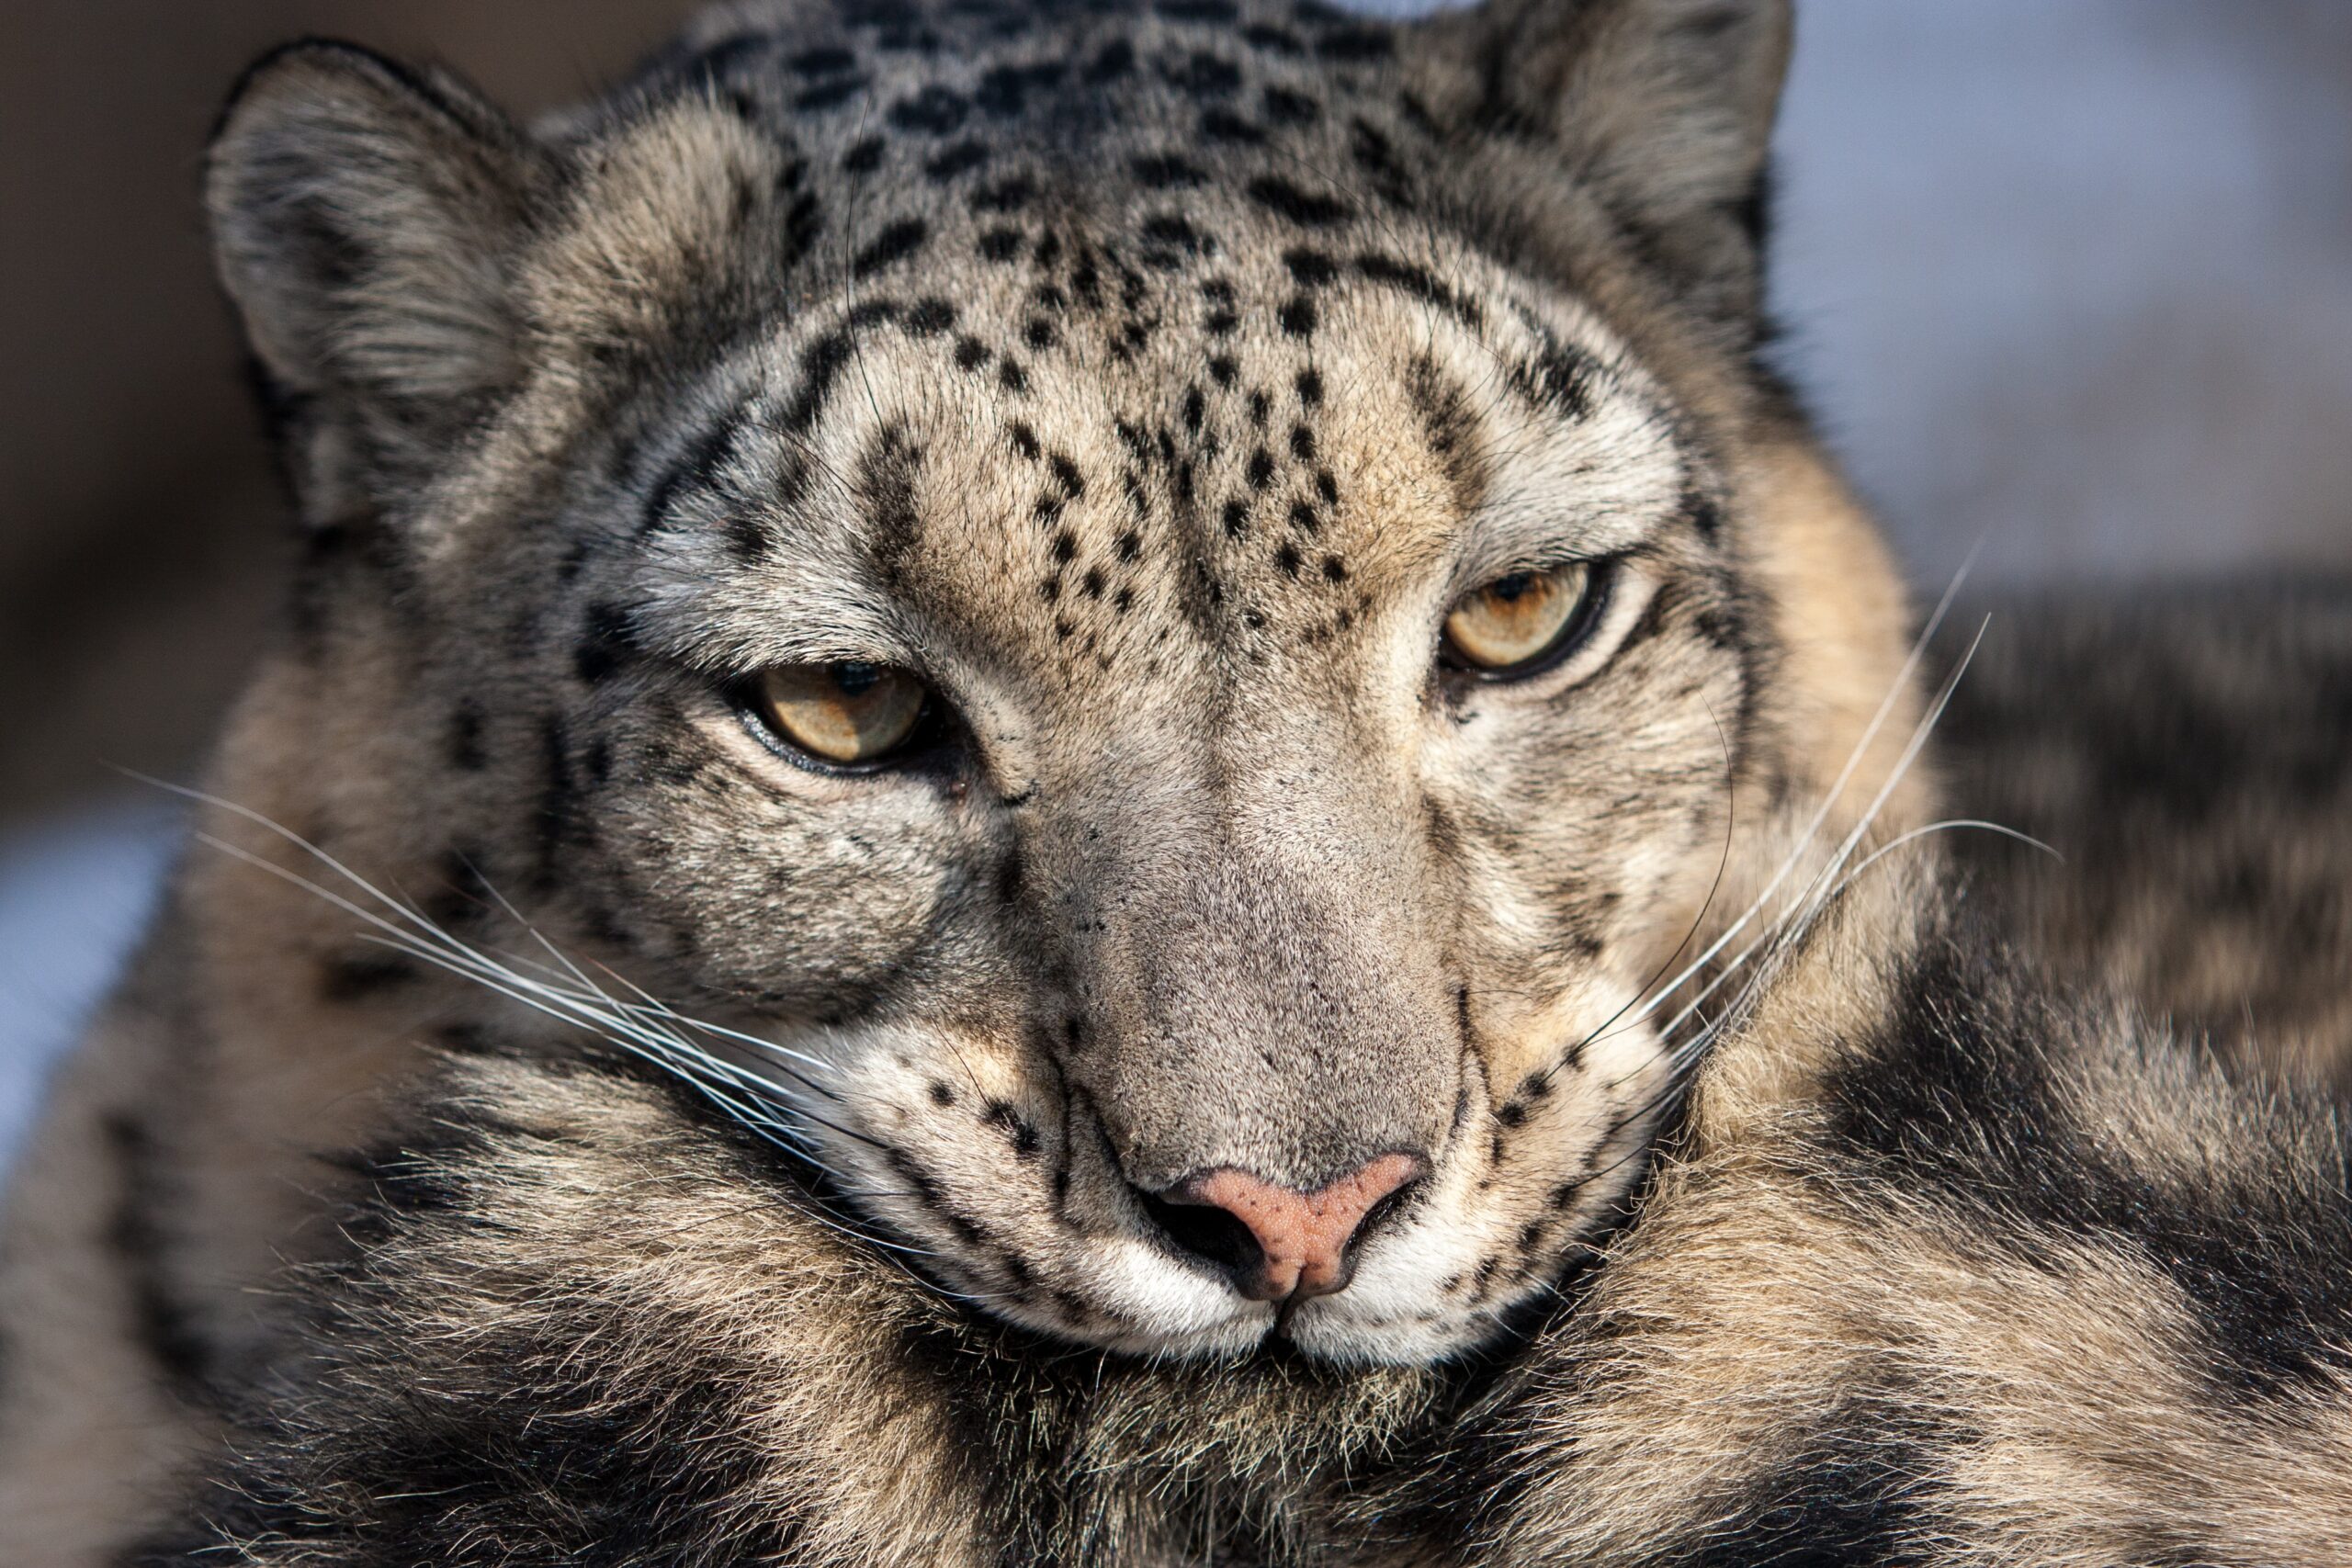 Snow Leopard facts and photos